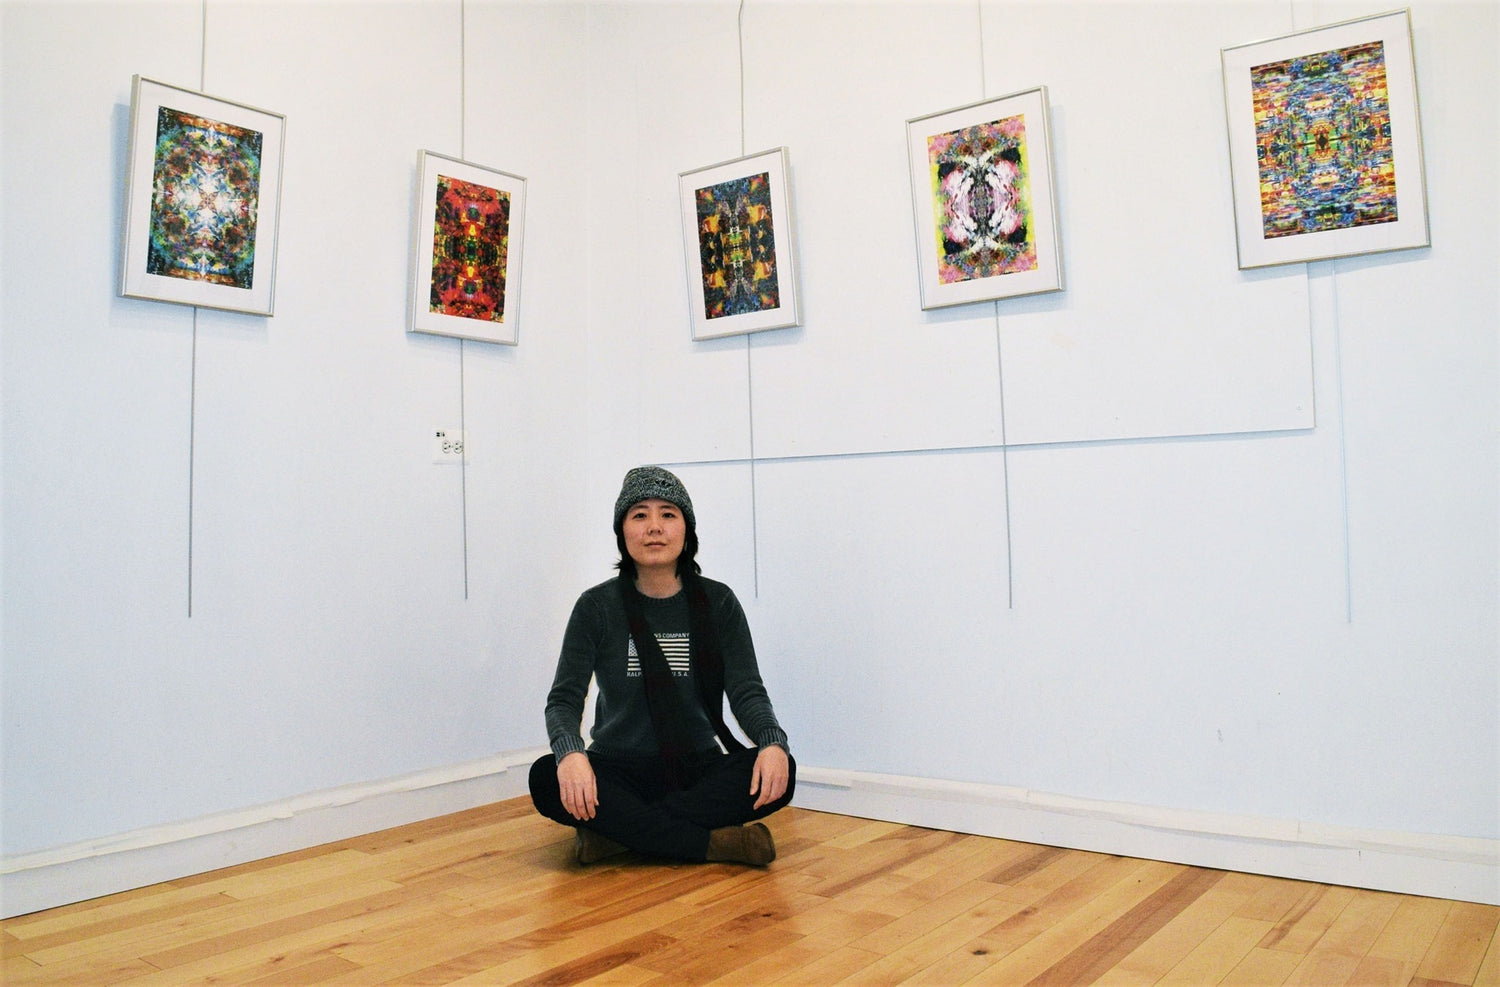 Artist Elaine B. Chao with her exhibited works- portrait